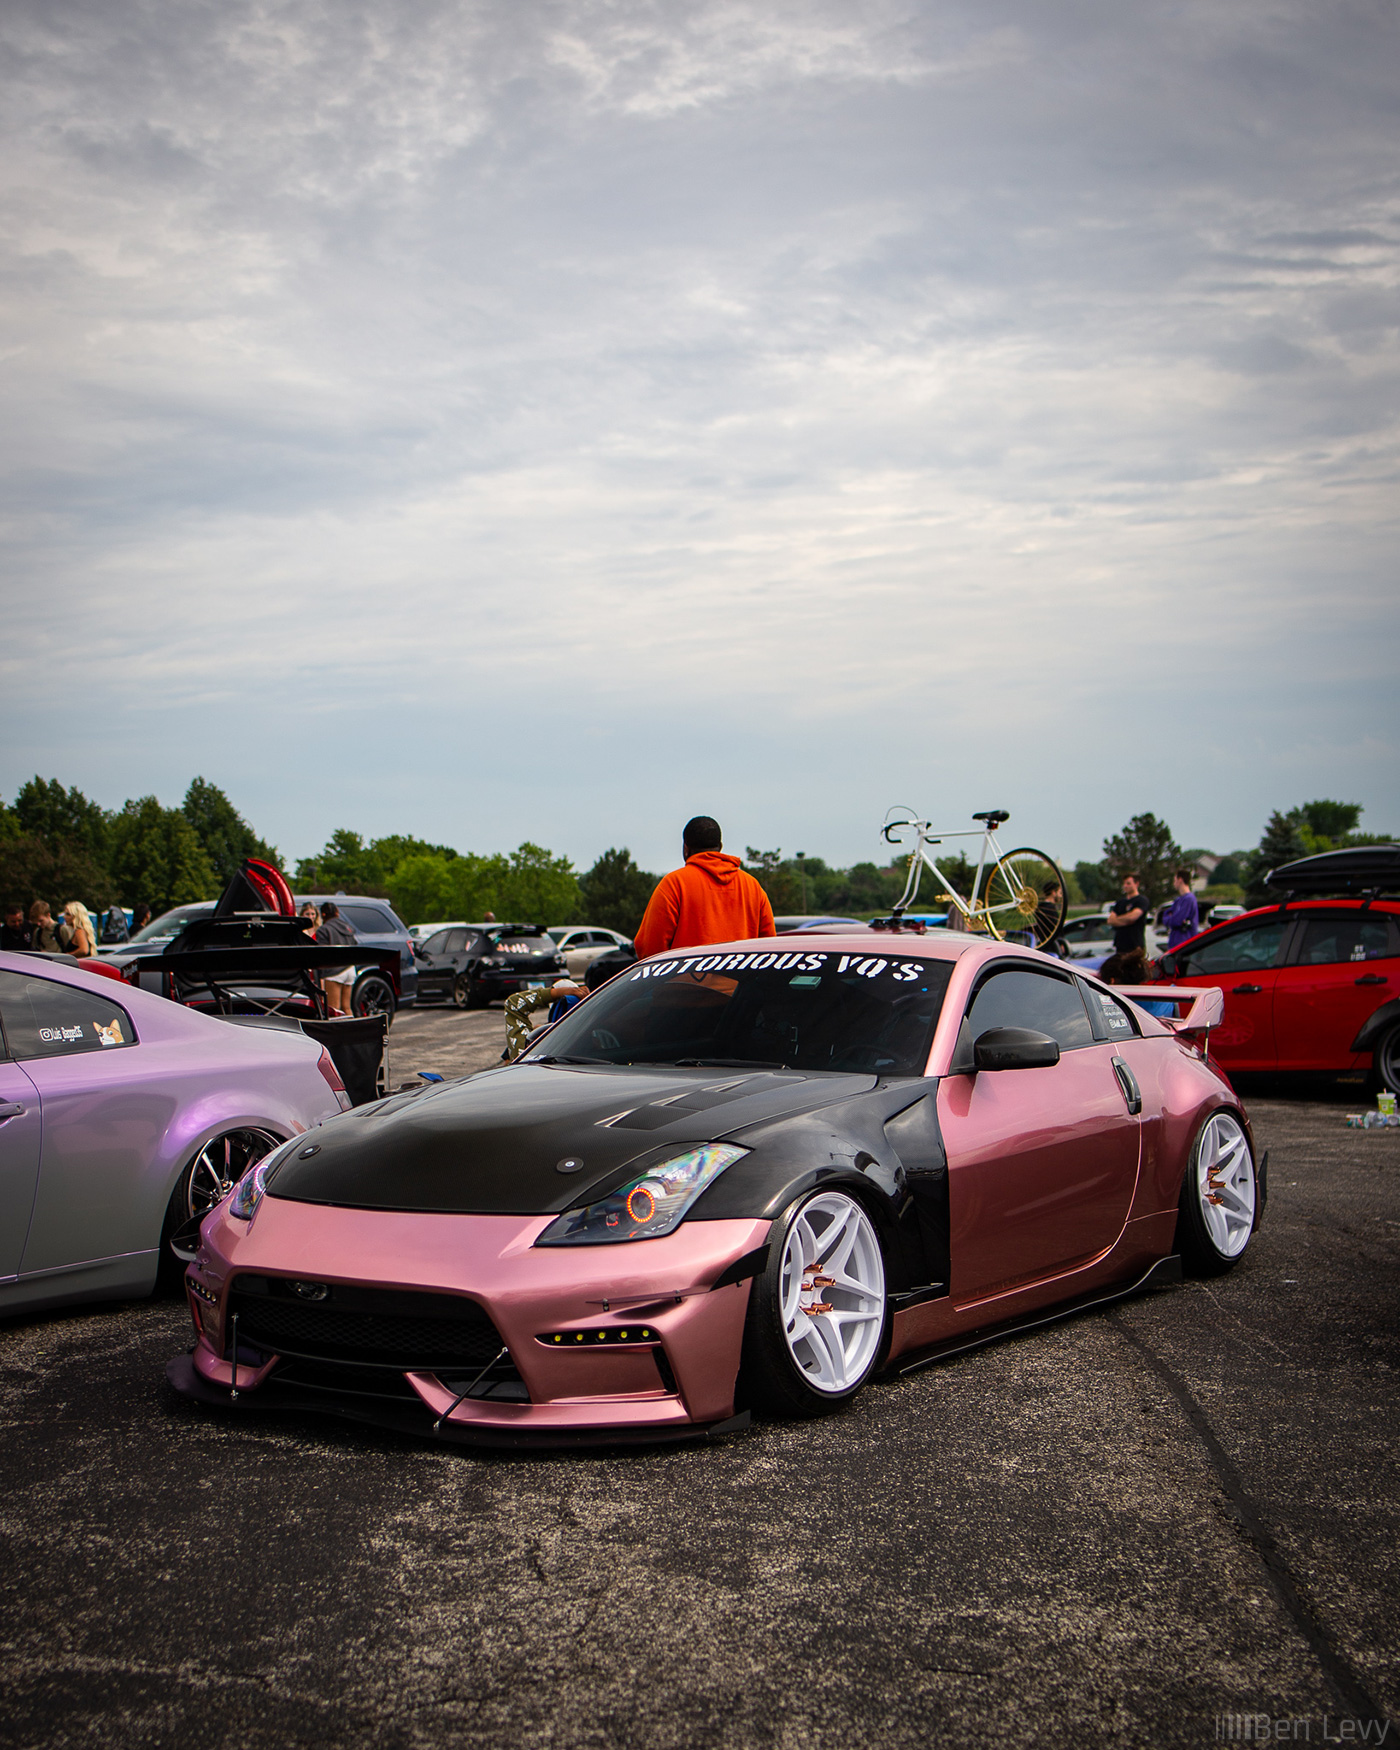 Z33 Nissan with Pink Wrap at Tuner Vibes Car Show